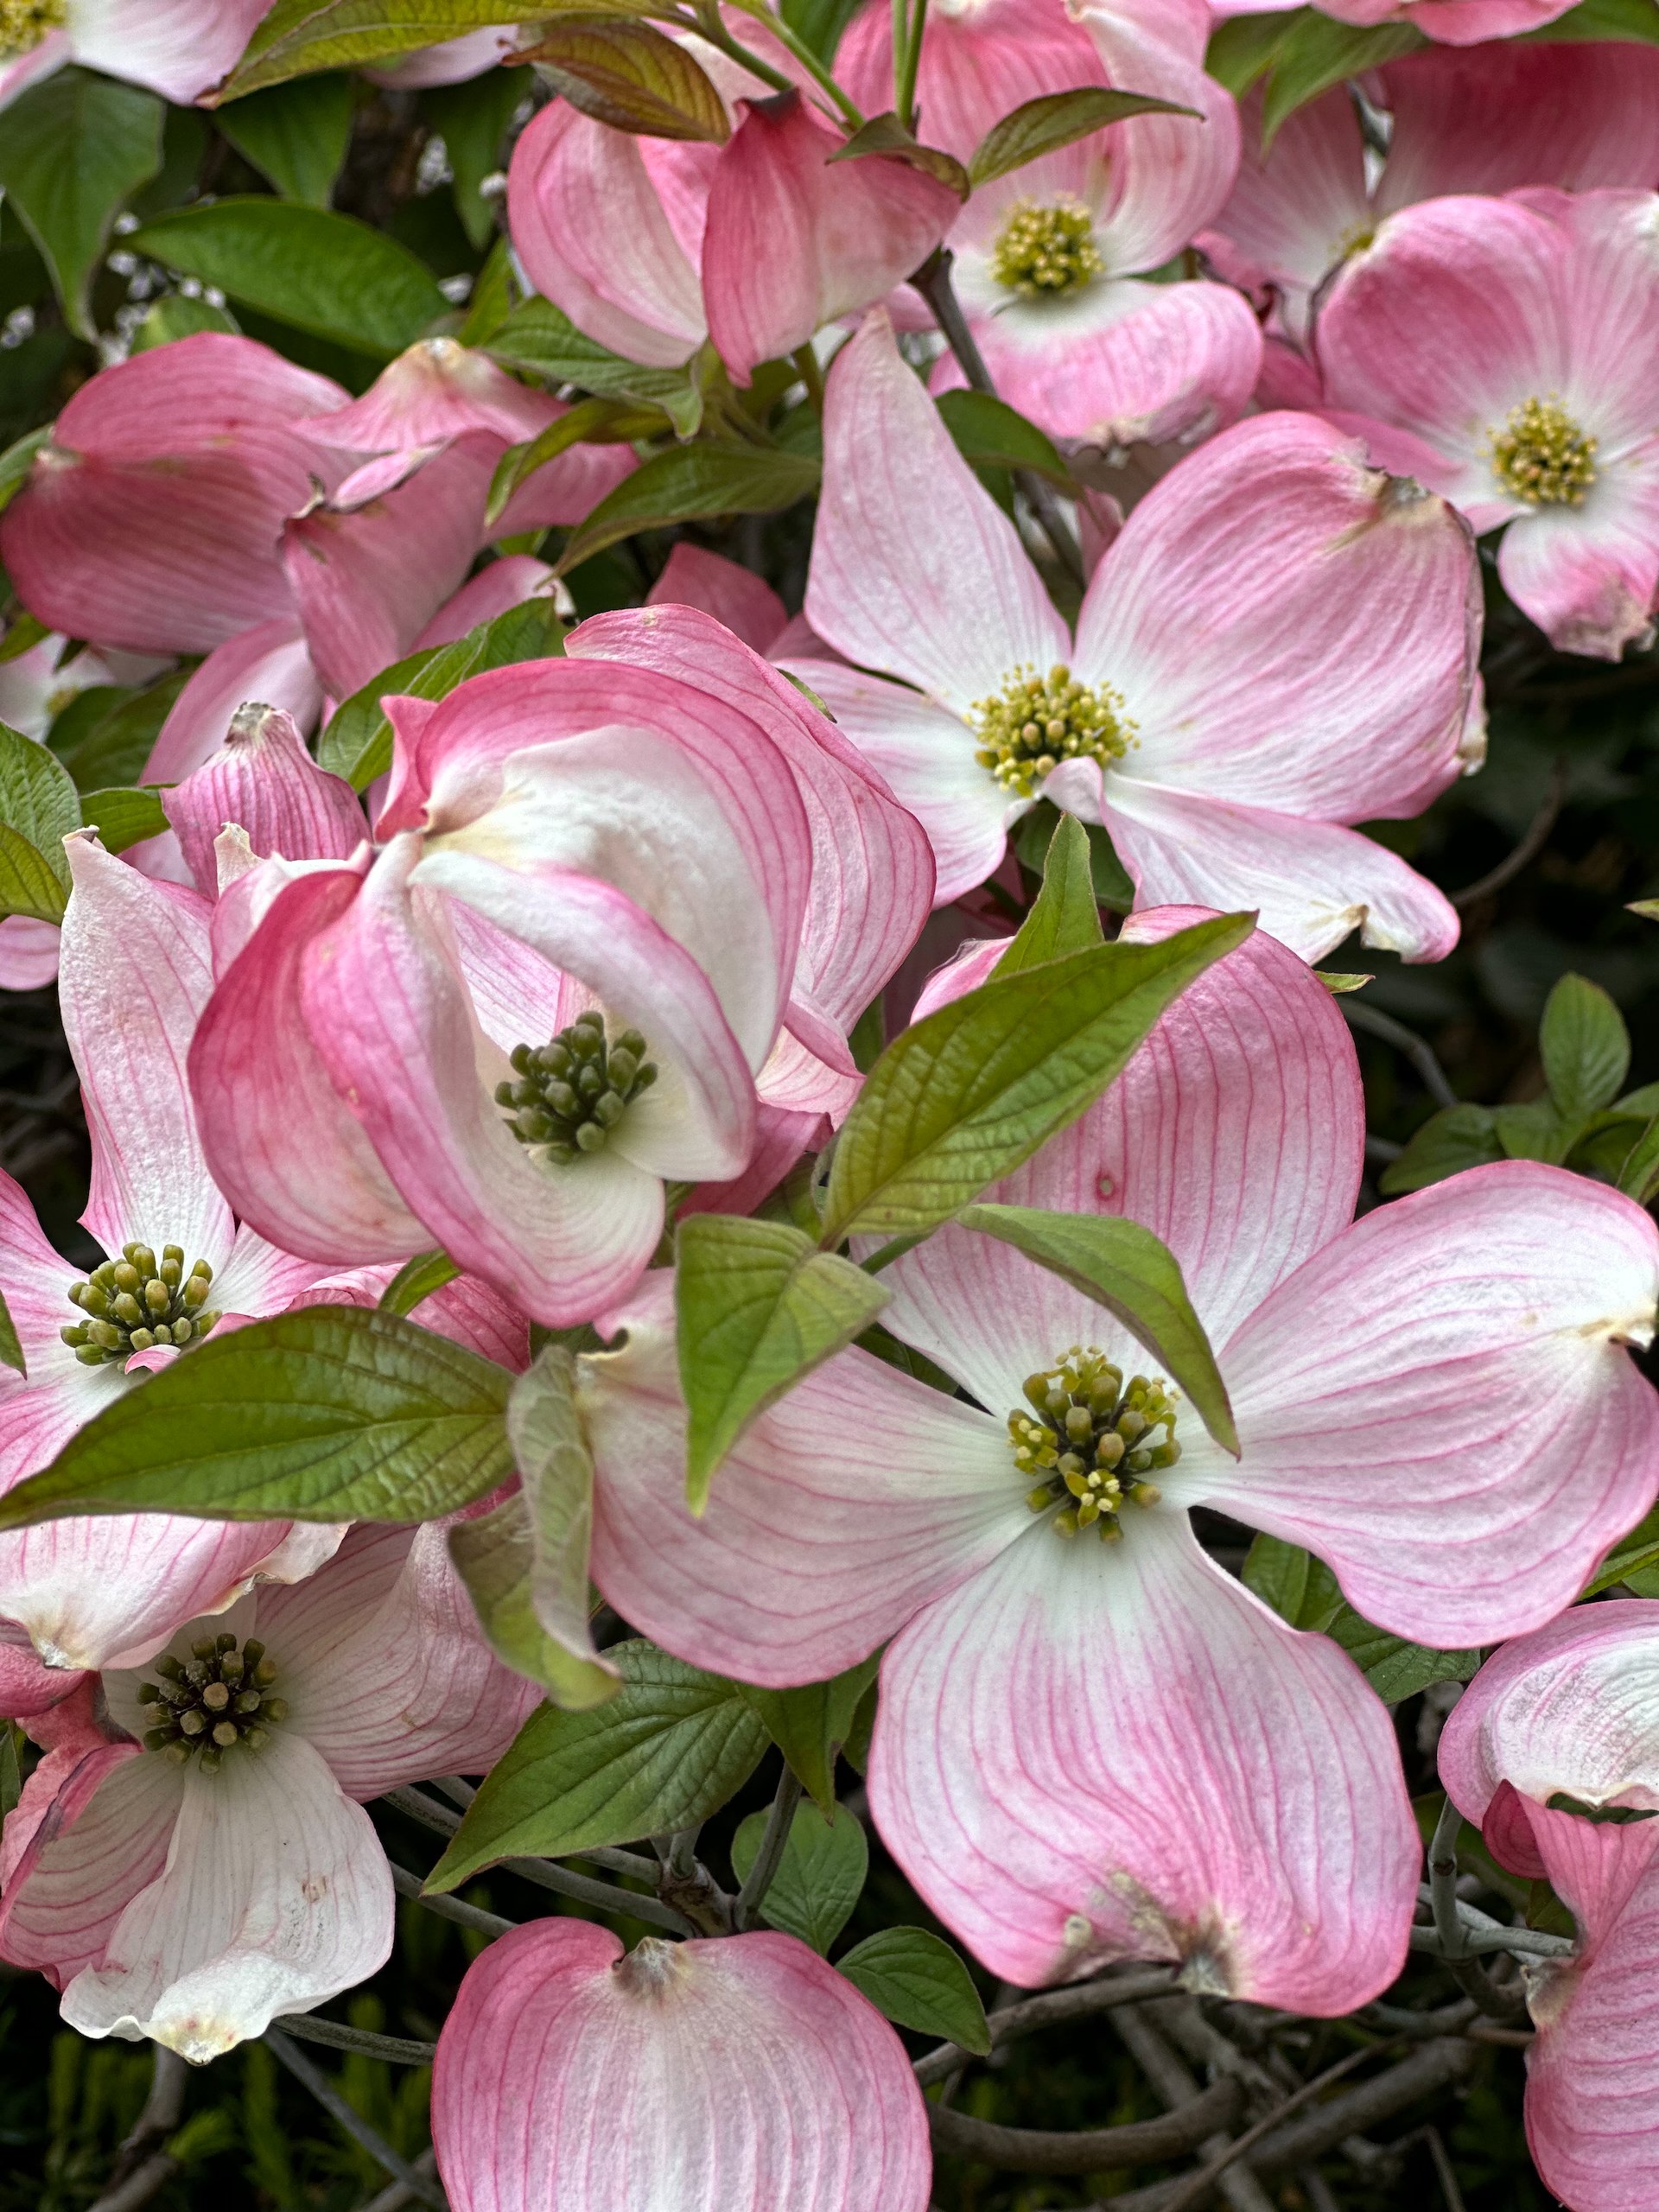  There are a couple of gorgeous pink dogwoods near our usual bus stop.  